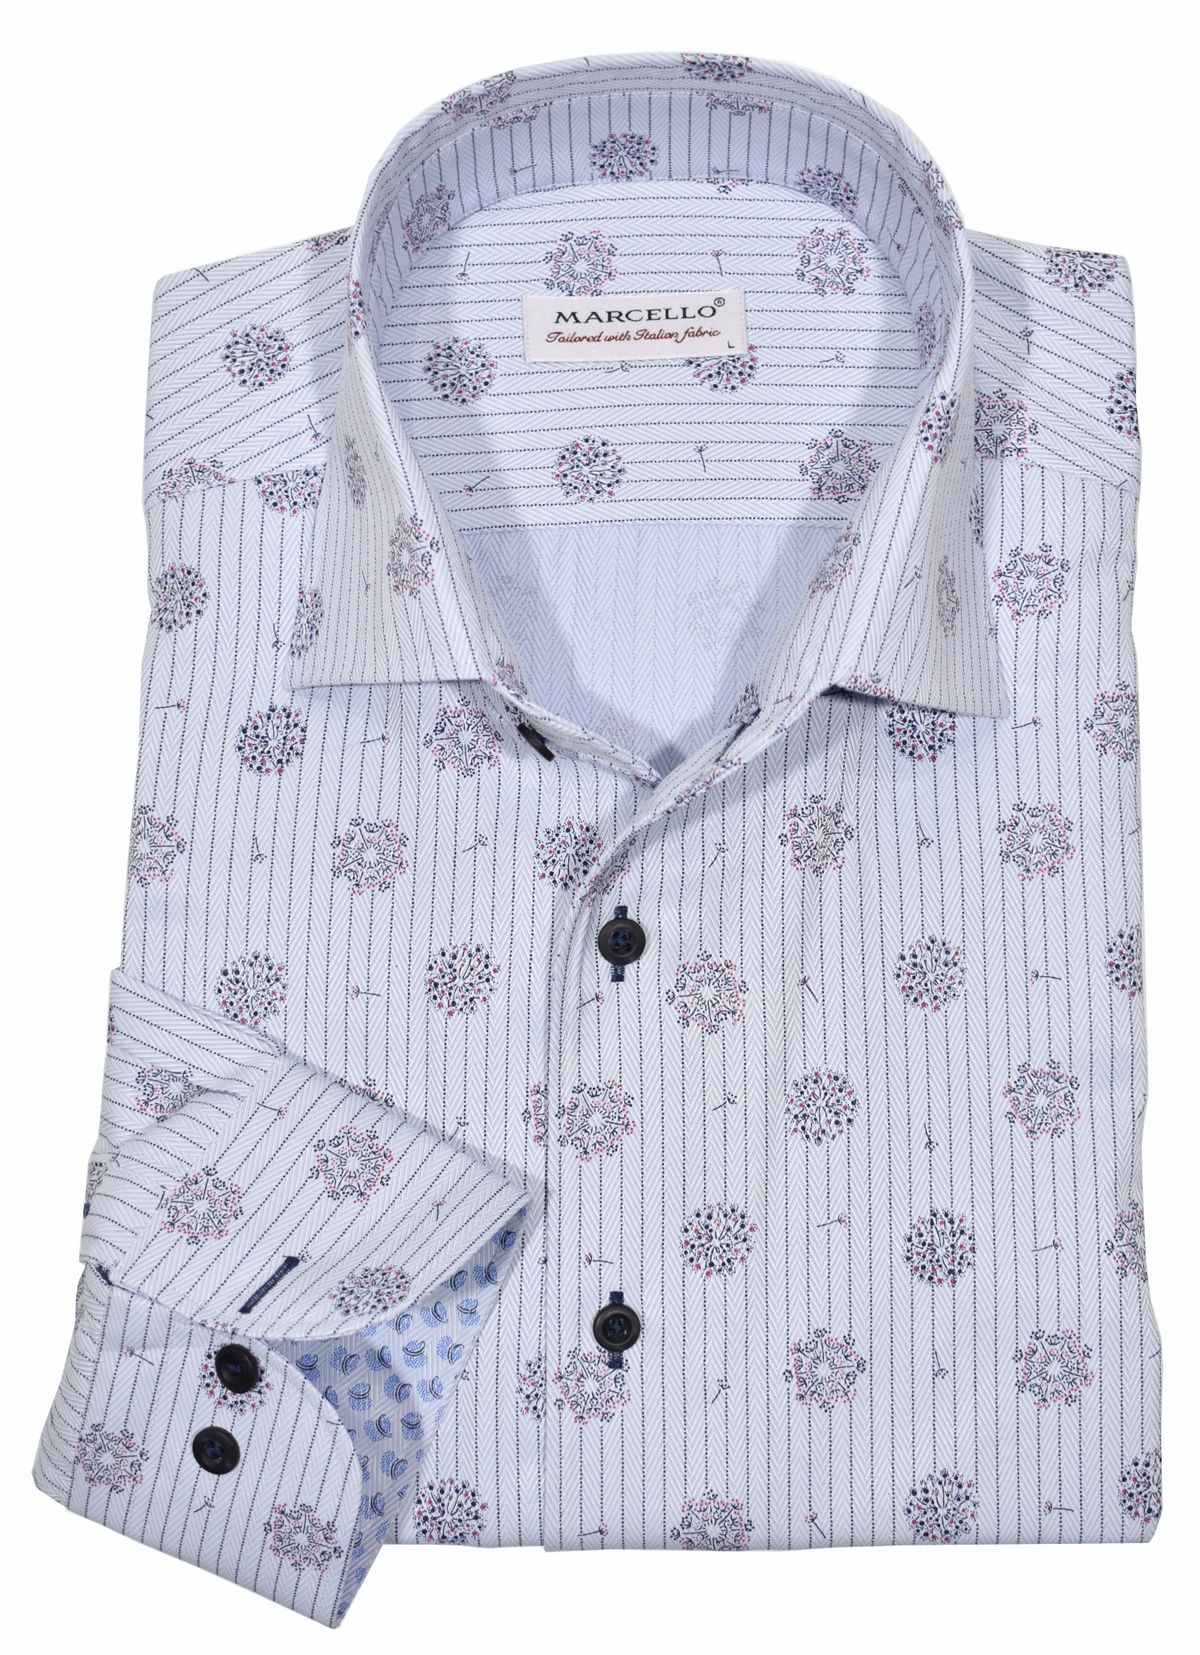 Marcello exclusive open roll collar stands perfect and looks great all the time.  Soft cotton microfiber with a herringbone finish to the fabric sports a fine stripe and a floating abstract medallion print. The perfect shirt to sport an attitude fit for cool jeans.  Classic shaped fit.